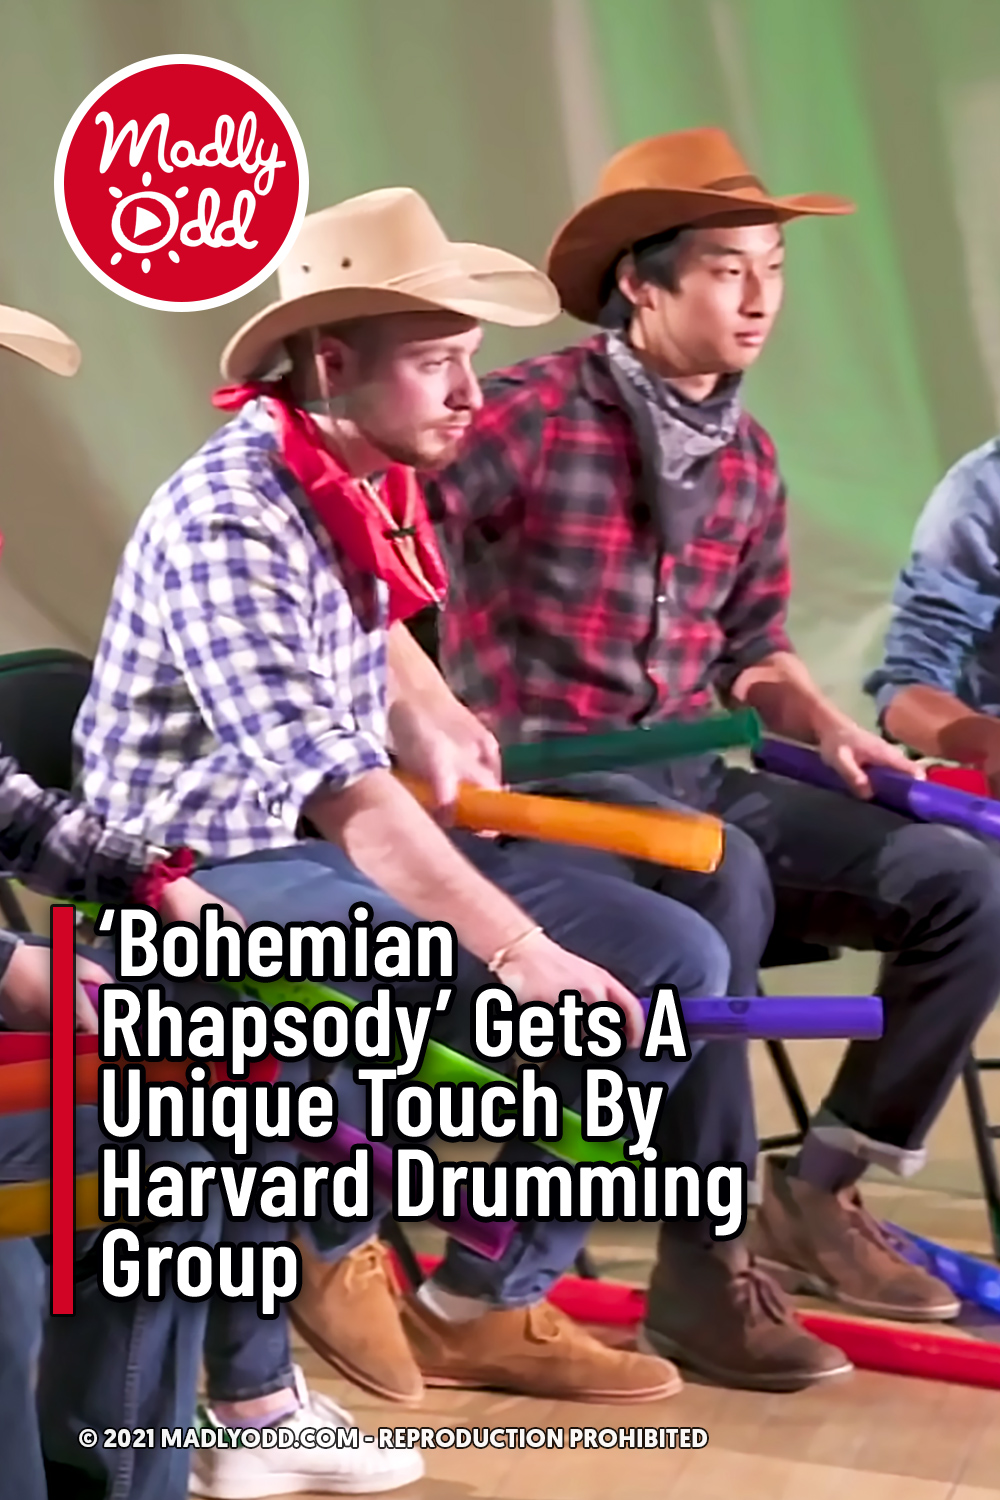 \'Bohemian Rhapsody\' Gets A Unique Touch By Harvard Drumming Group